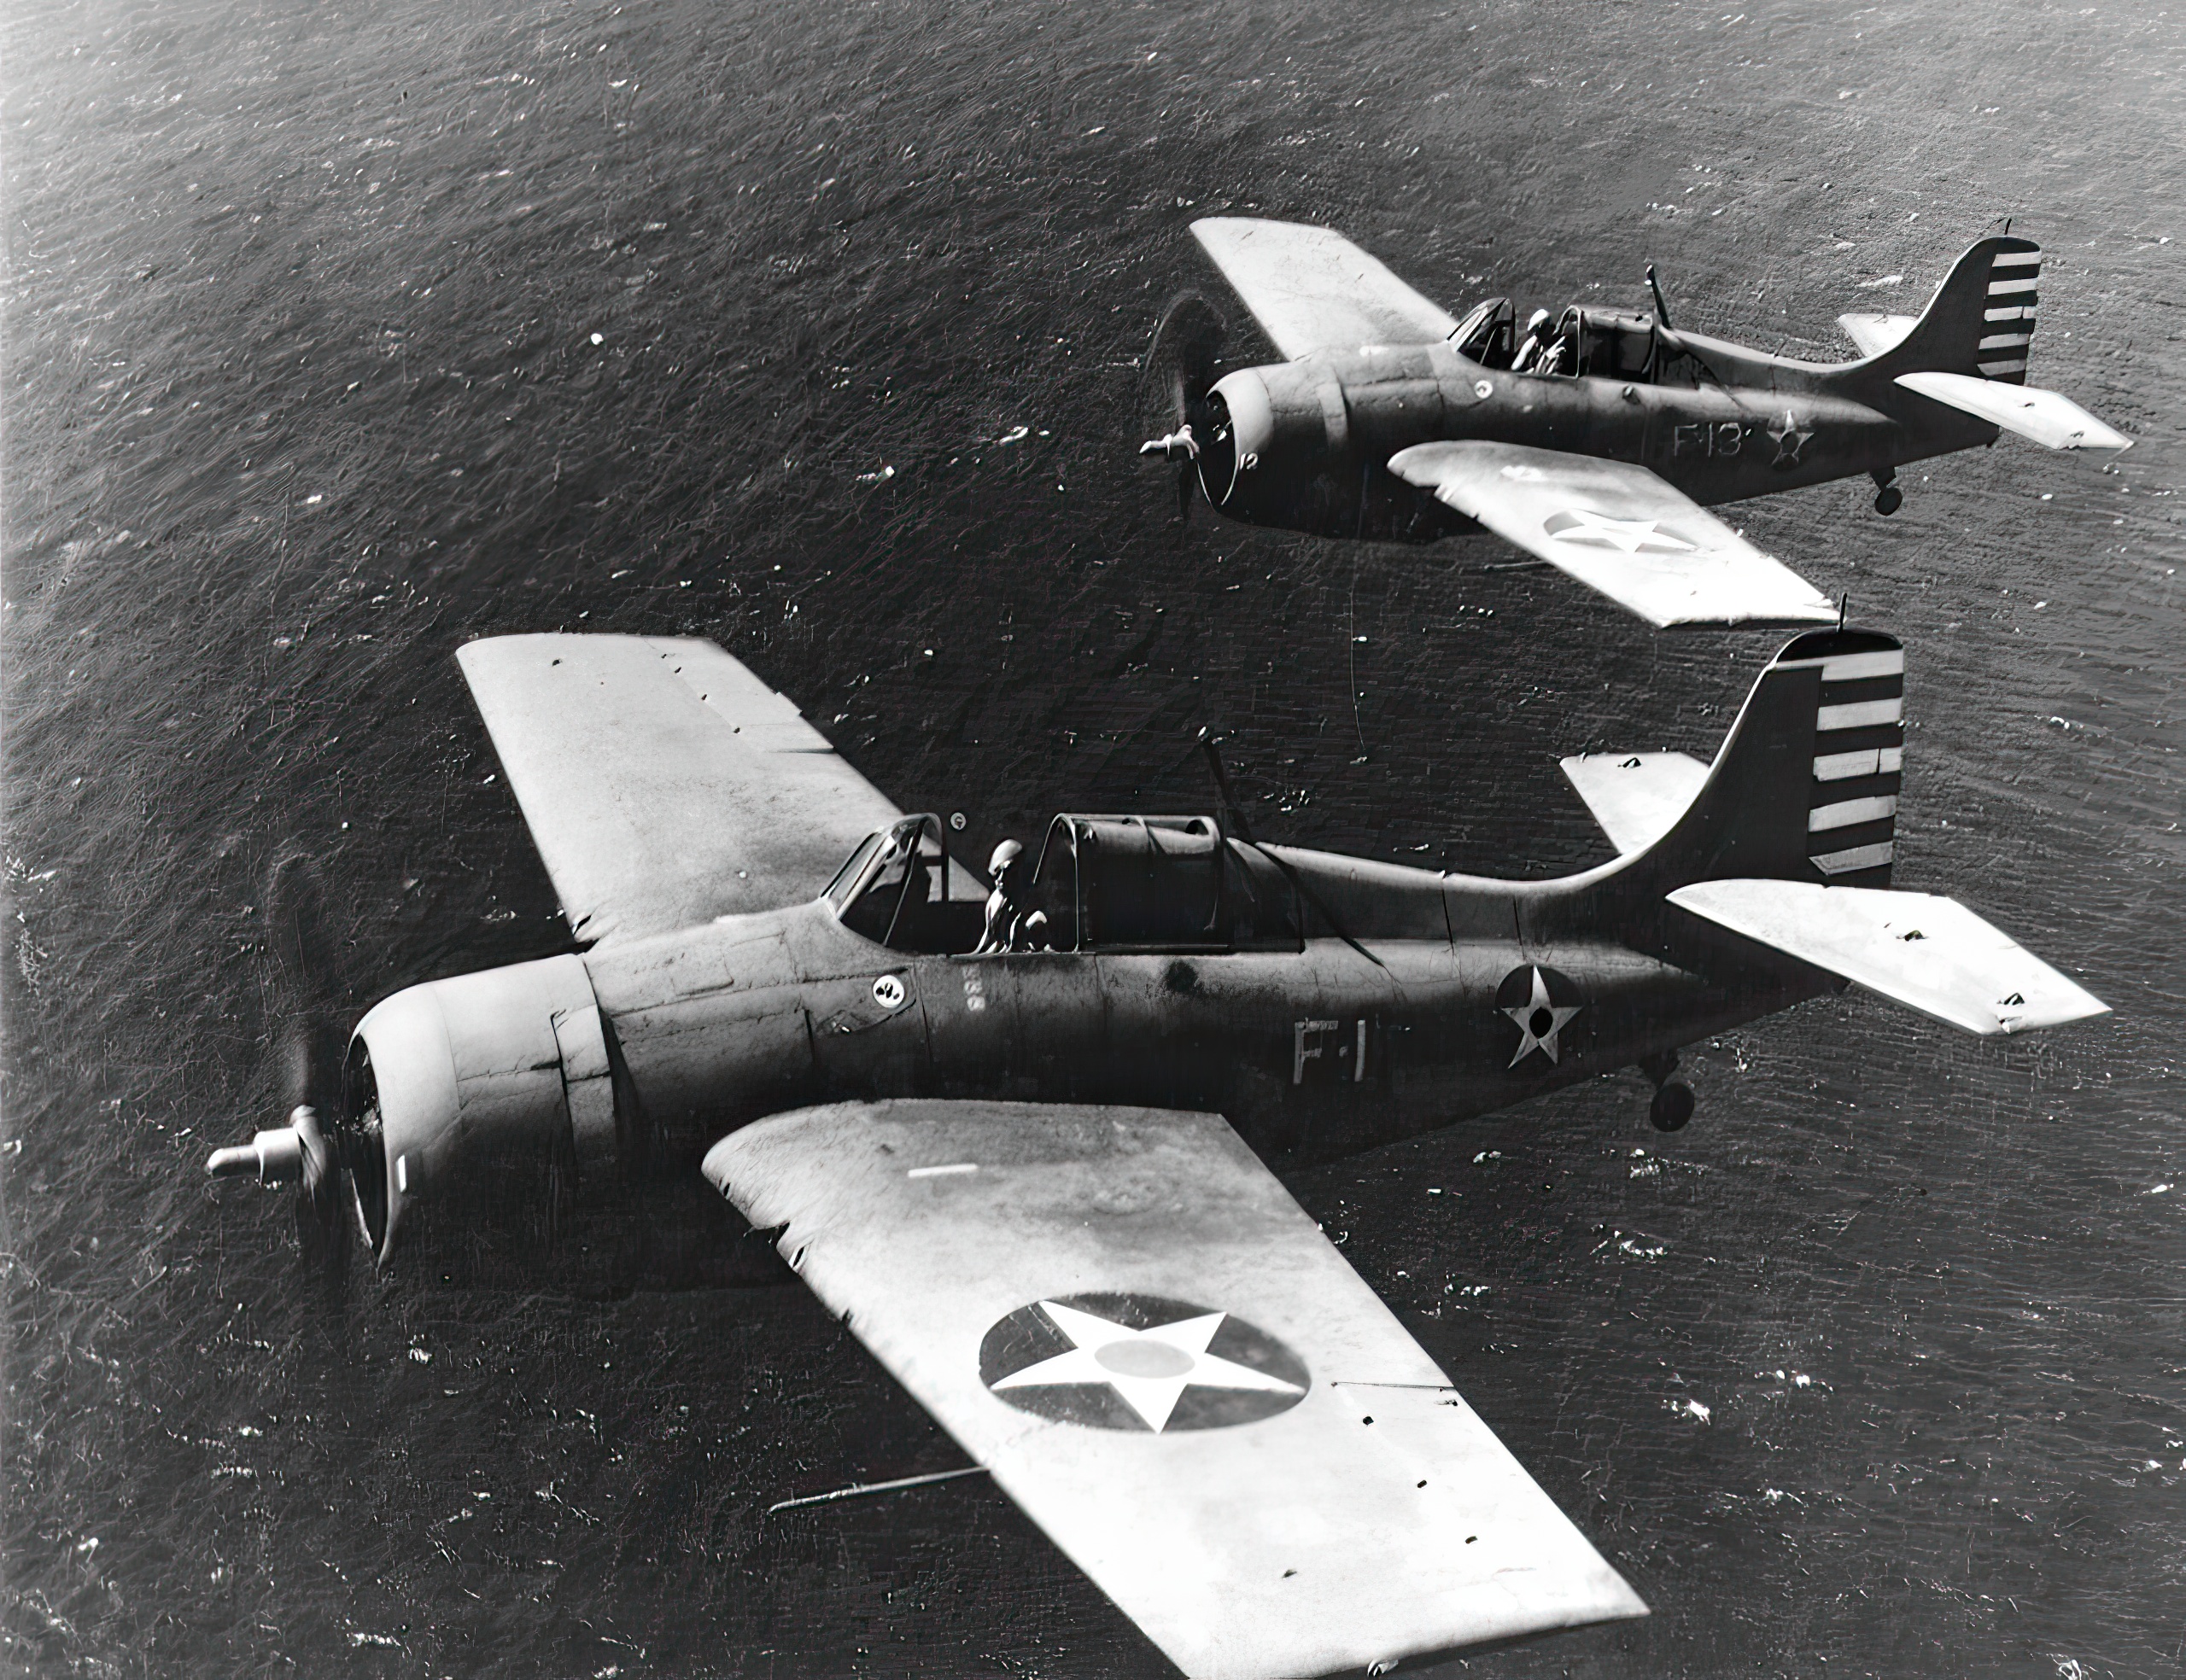 F4F-3A Wildcats flown by LCMDR. Thach (F-1) and Lt. O'Hare (F-13) during the aerial photography flight of April 11, 1942